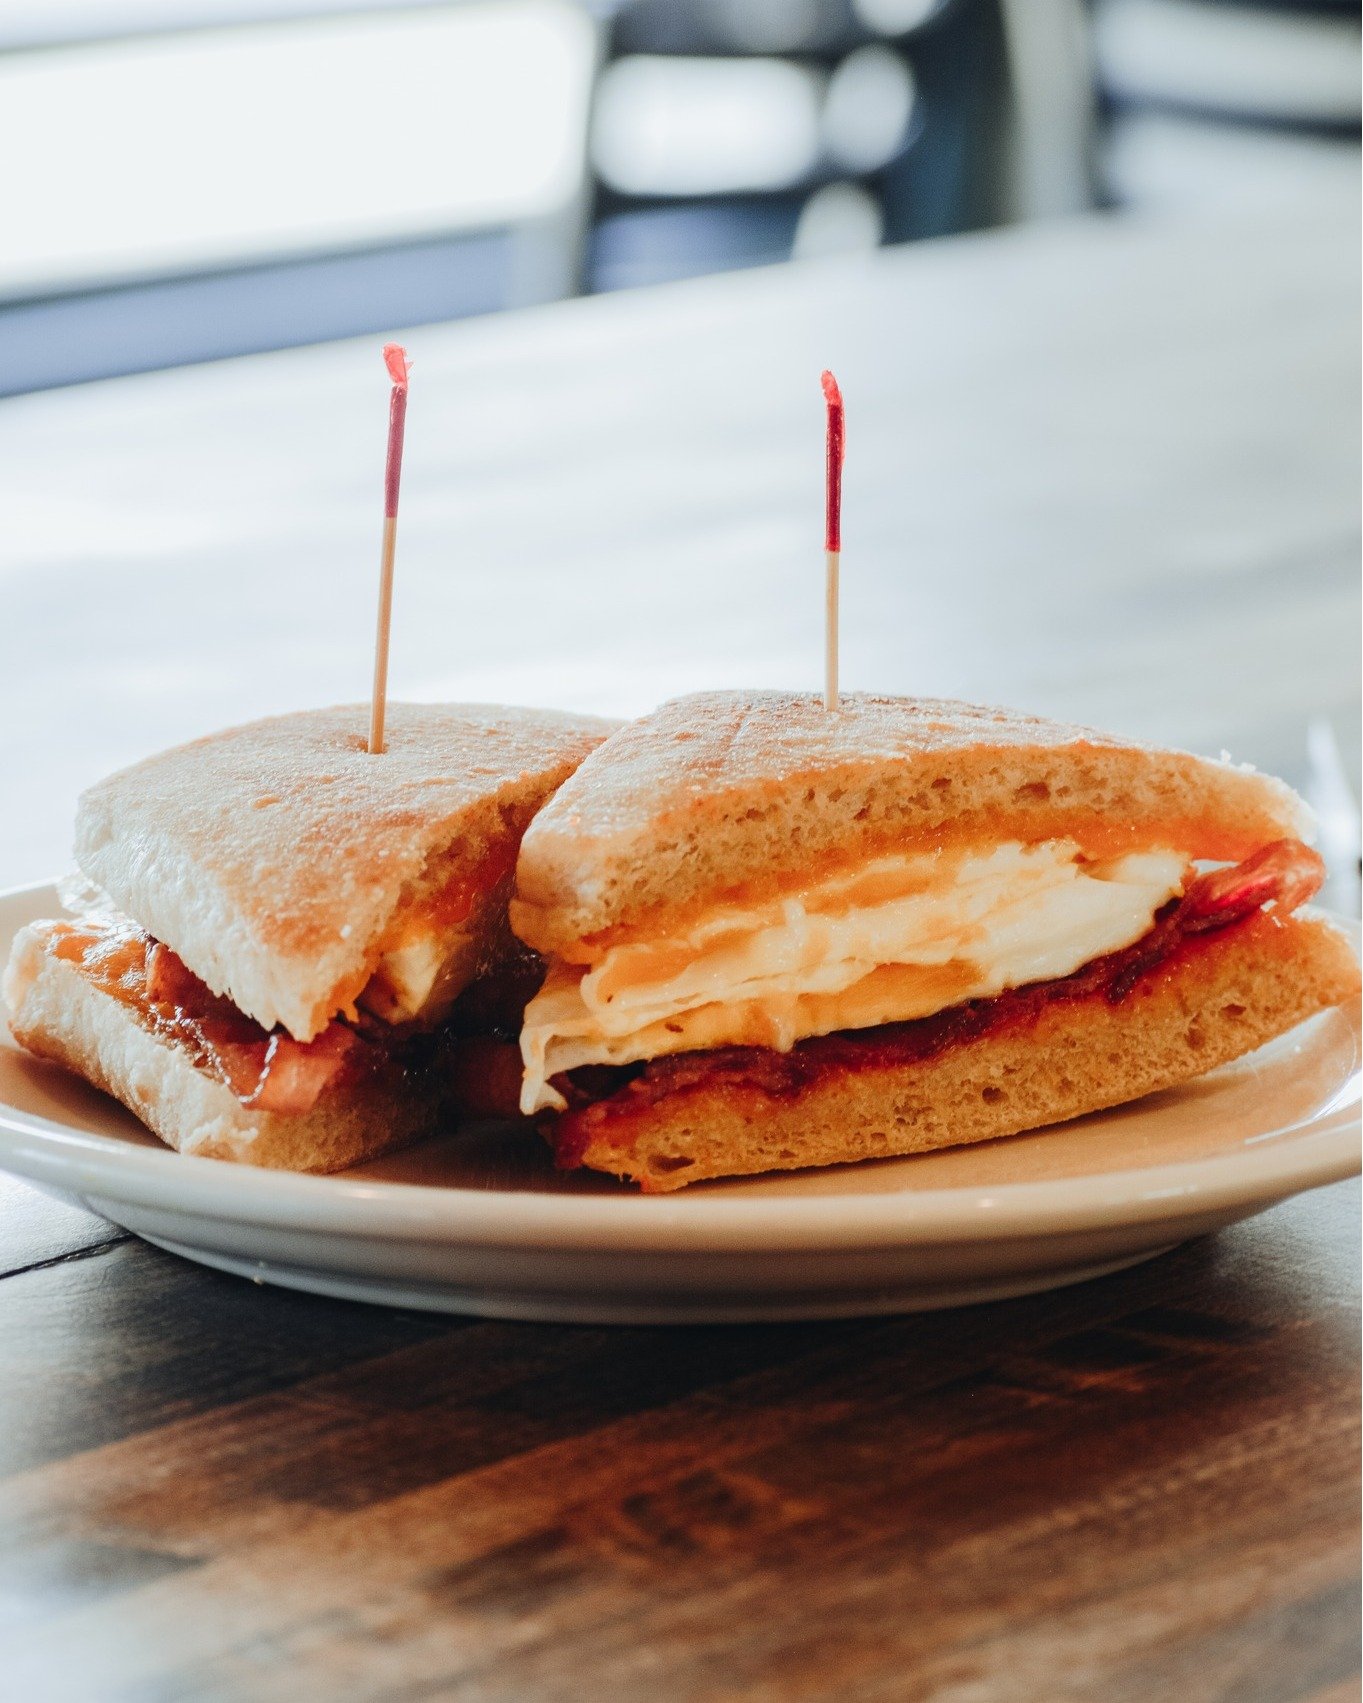 Getting up with the sun is worth it for our Sunrise Sandwich. A hearty combination of eggs, crispy bacon, and melted cheddar on a perfectly toasted English muffin. For those who prefer gluten-free, we've got you covered. Rise and shine with this deli